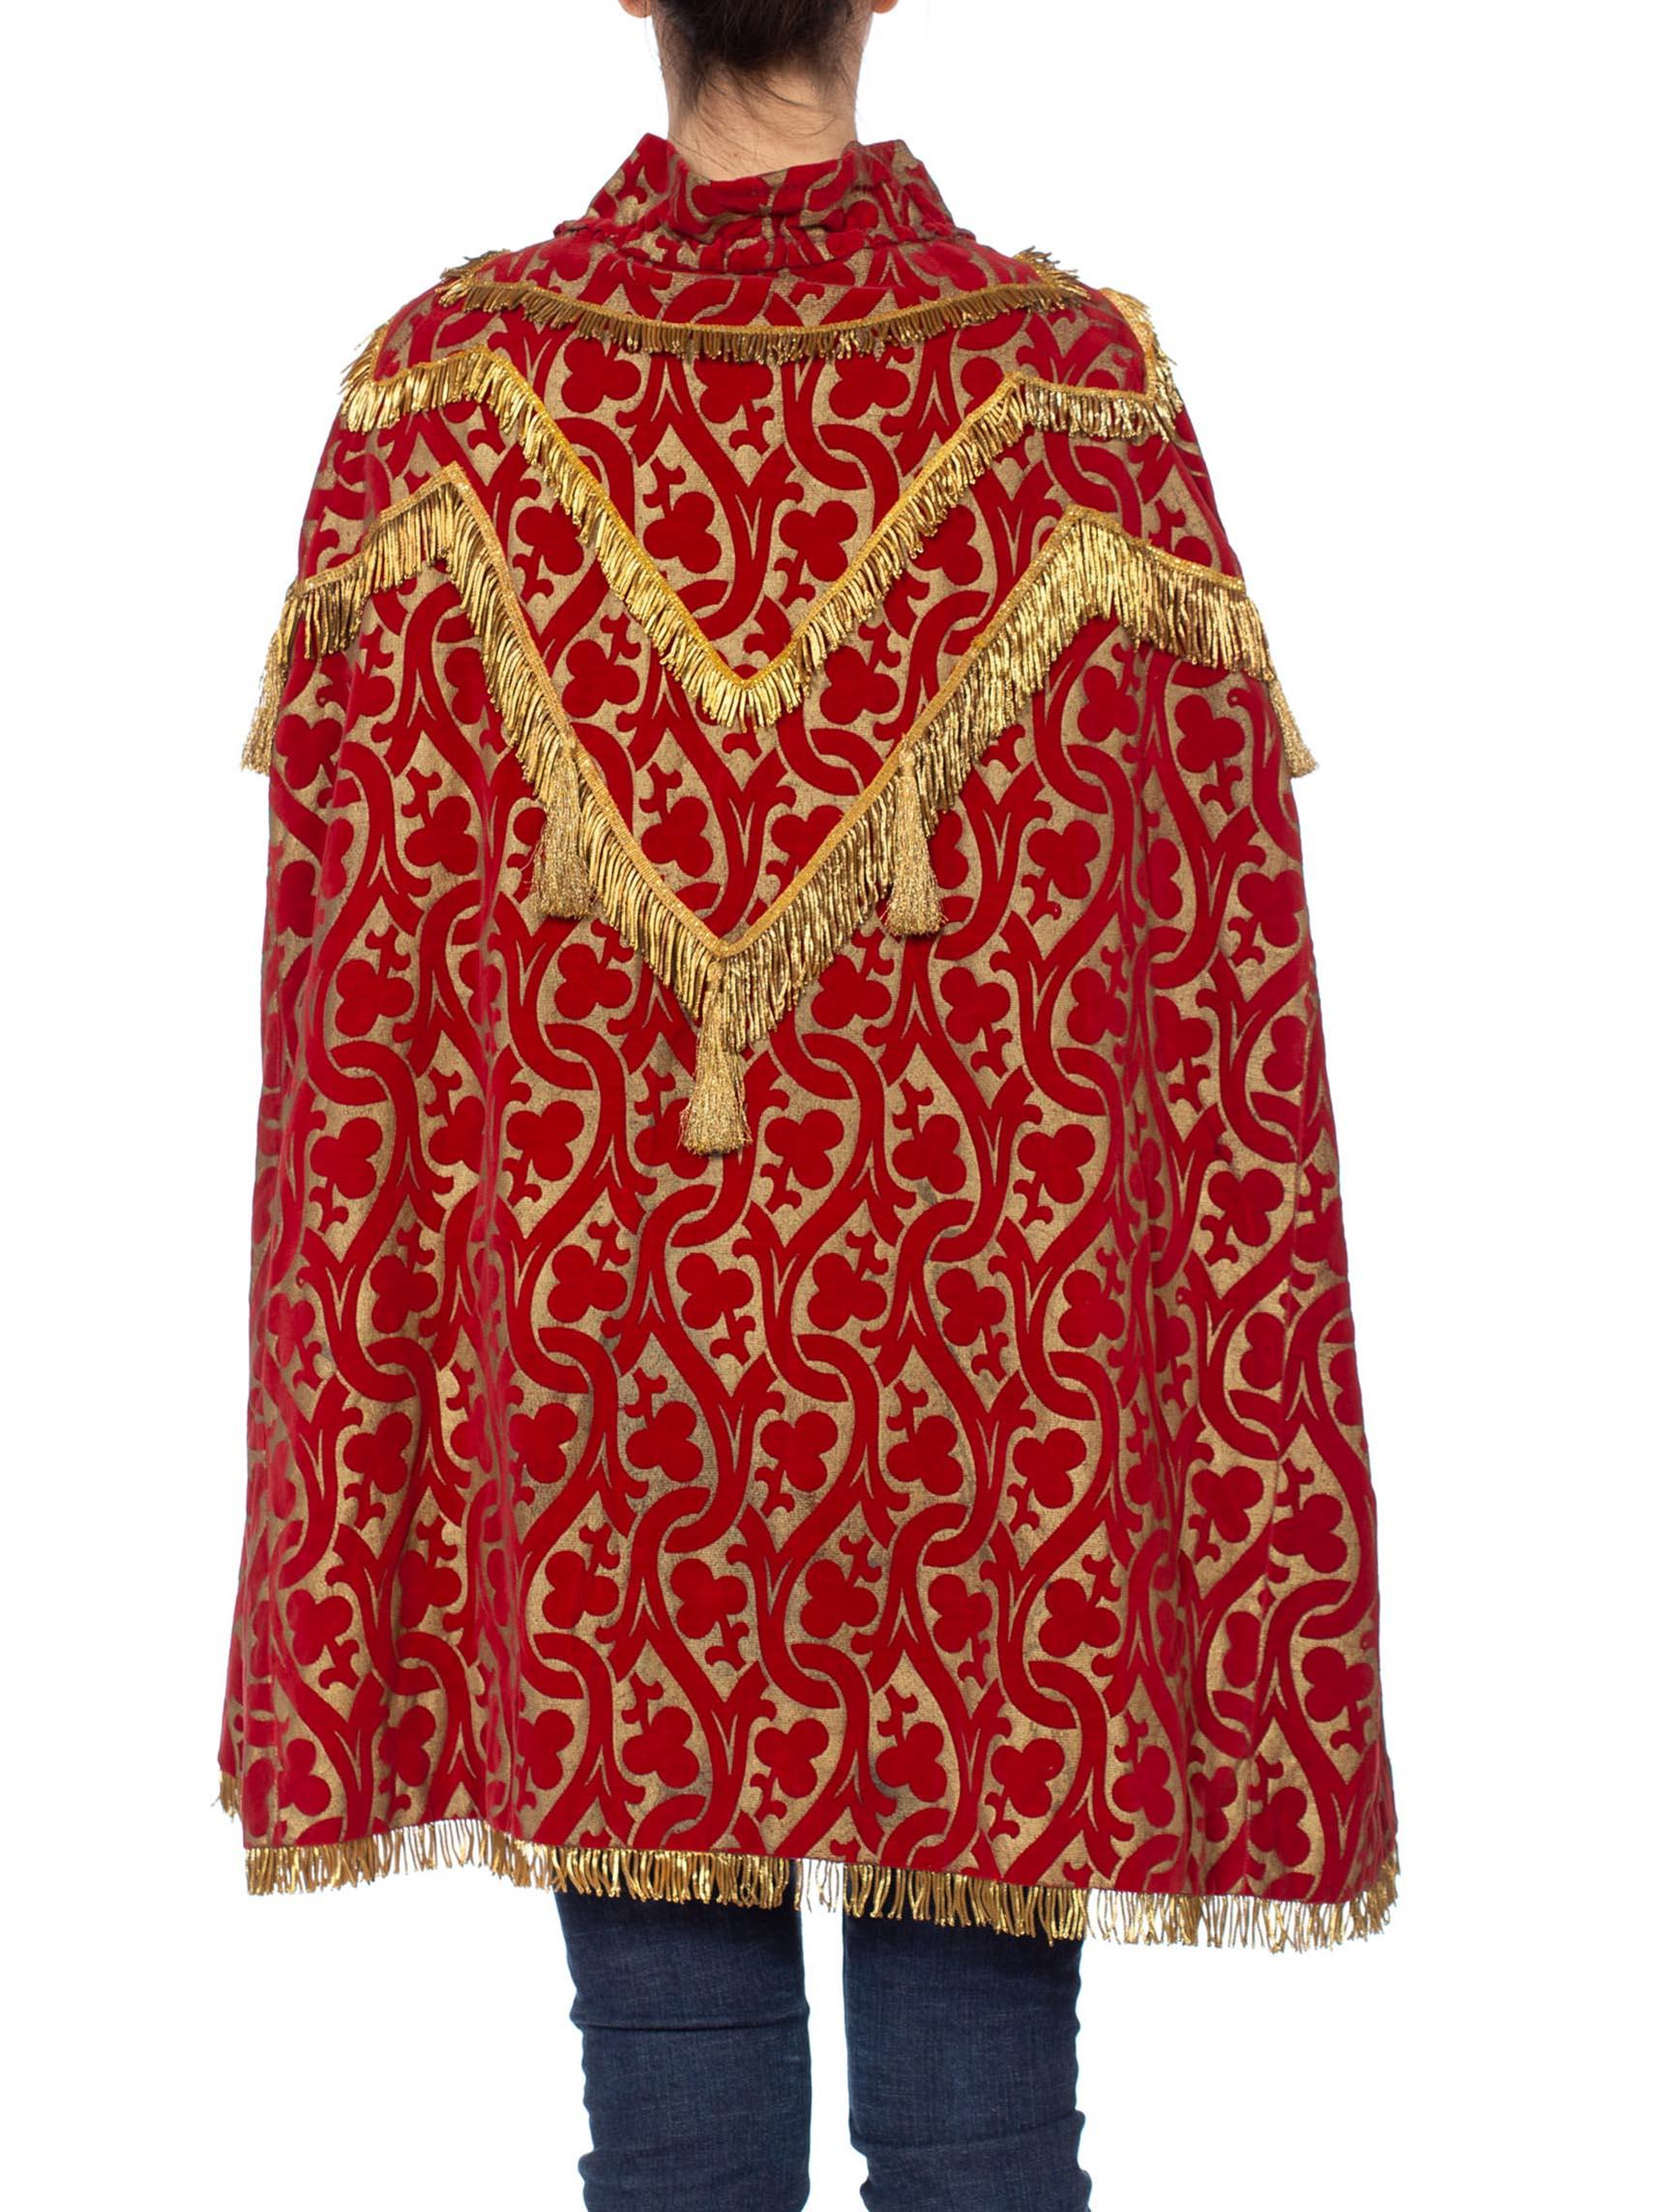 MORPHEW COLLECTION Red Metallic Printed Velvet Silk Lined Cape With Real Gold B For Sale 2